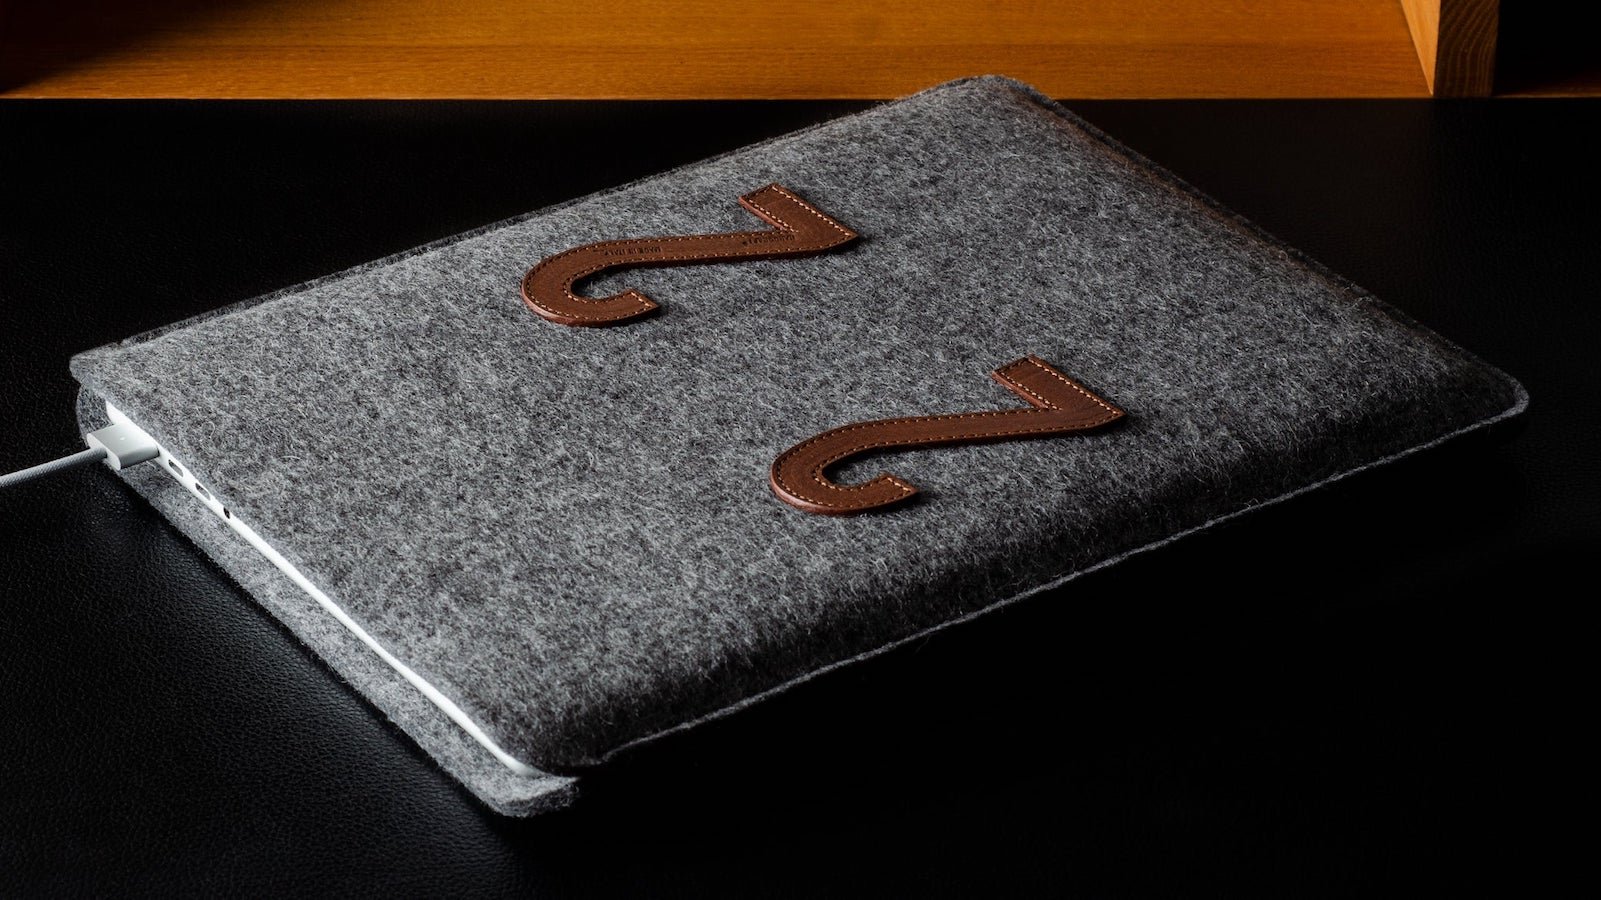 hardgraft 22 MacBook Pro Sleeve features thick wool to protect your device from scratches